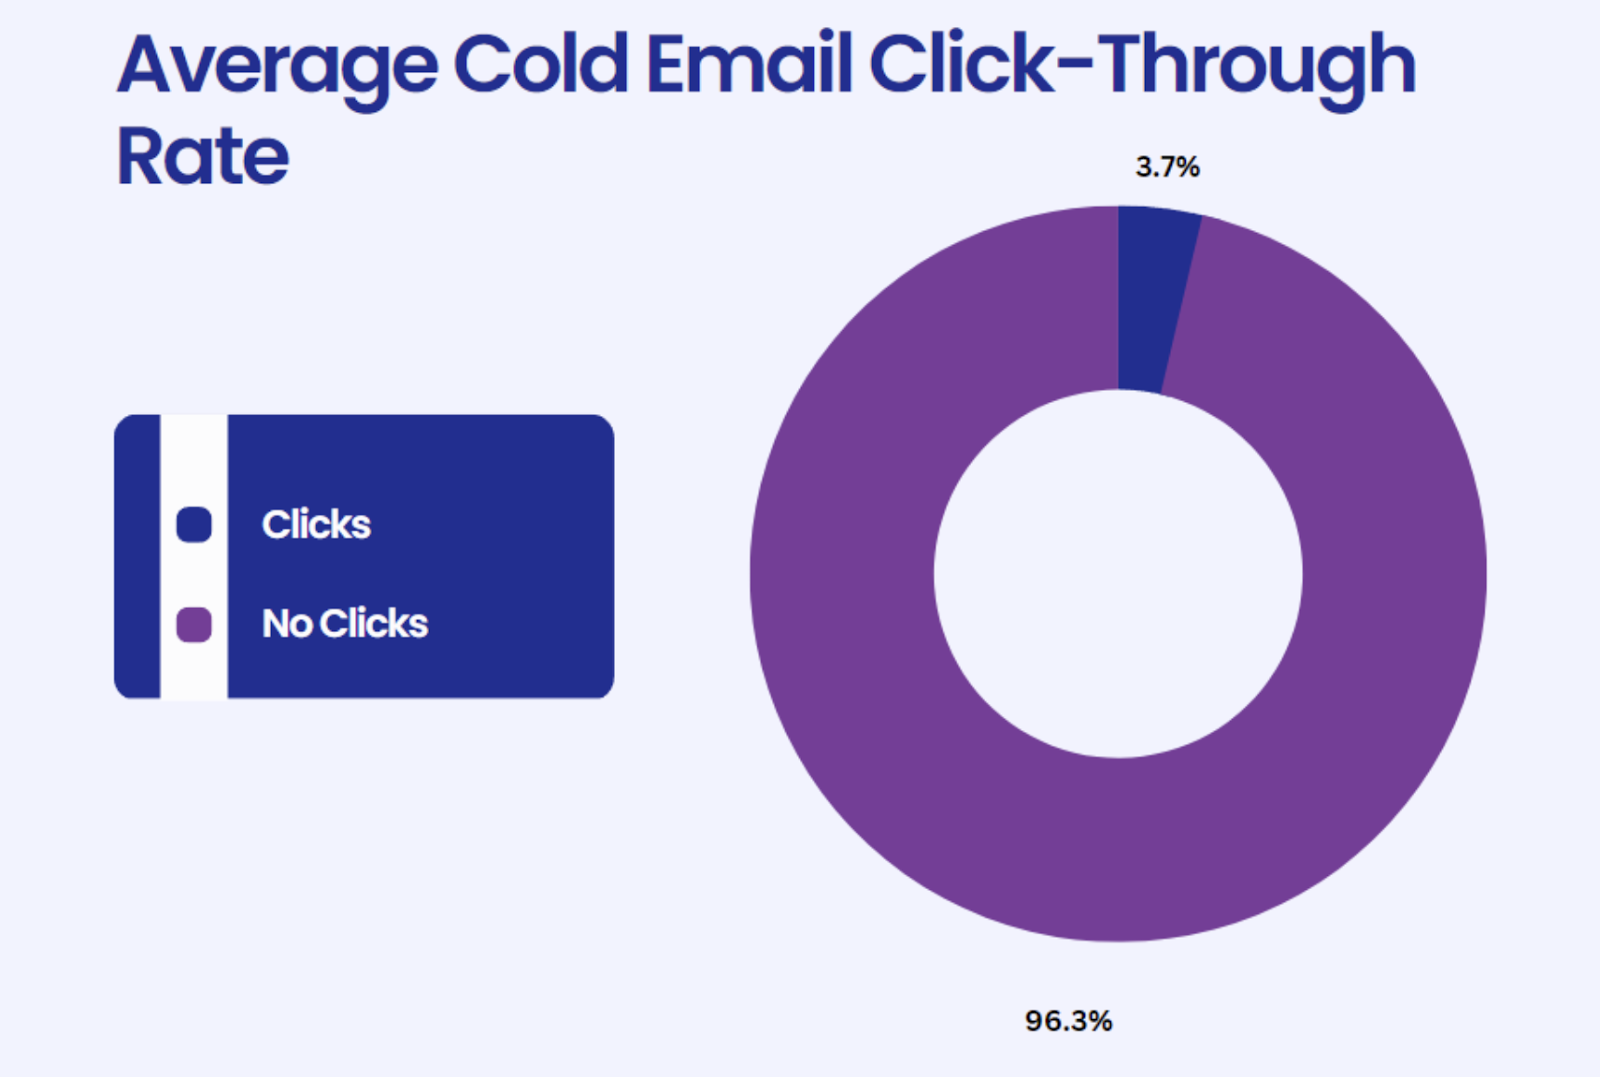 Pie chart showing the average cold email click-through rate.